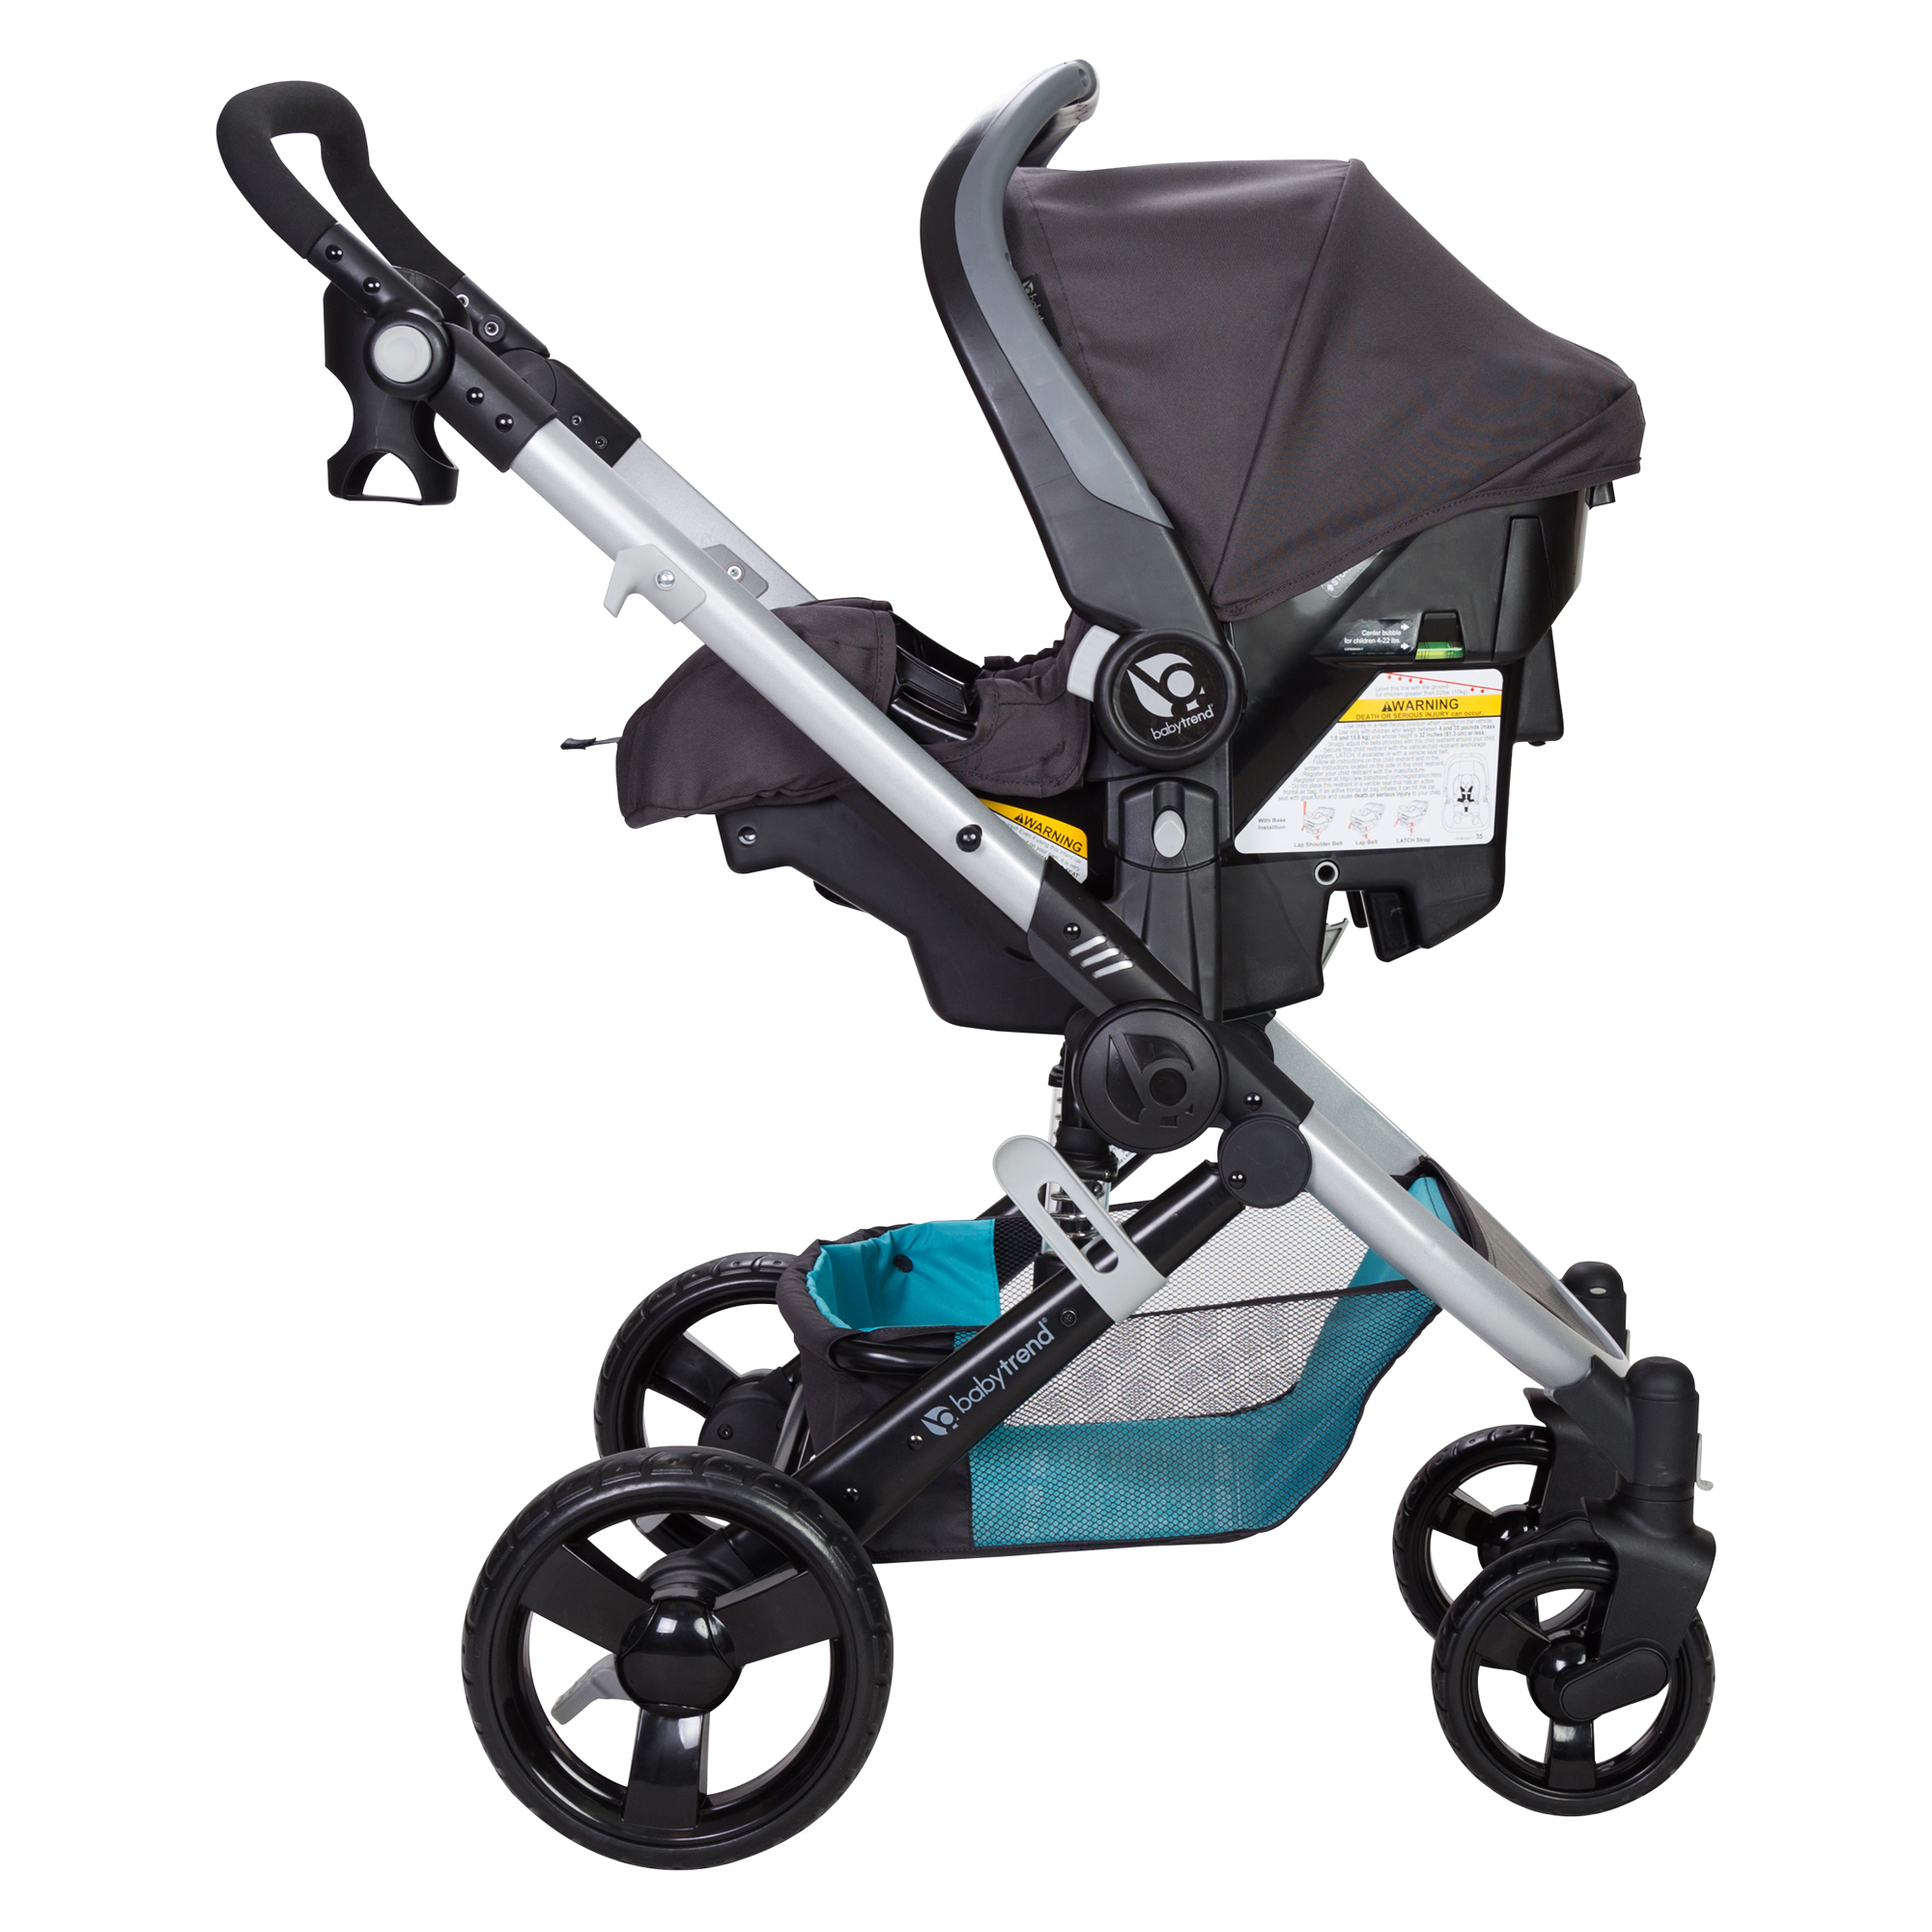 Baby Trend Espy Travel System Stroller, Paramount - image 3 of 6